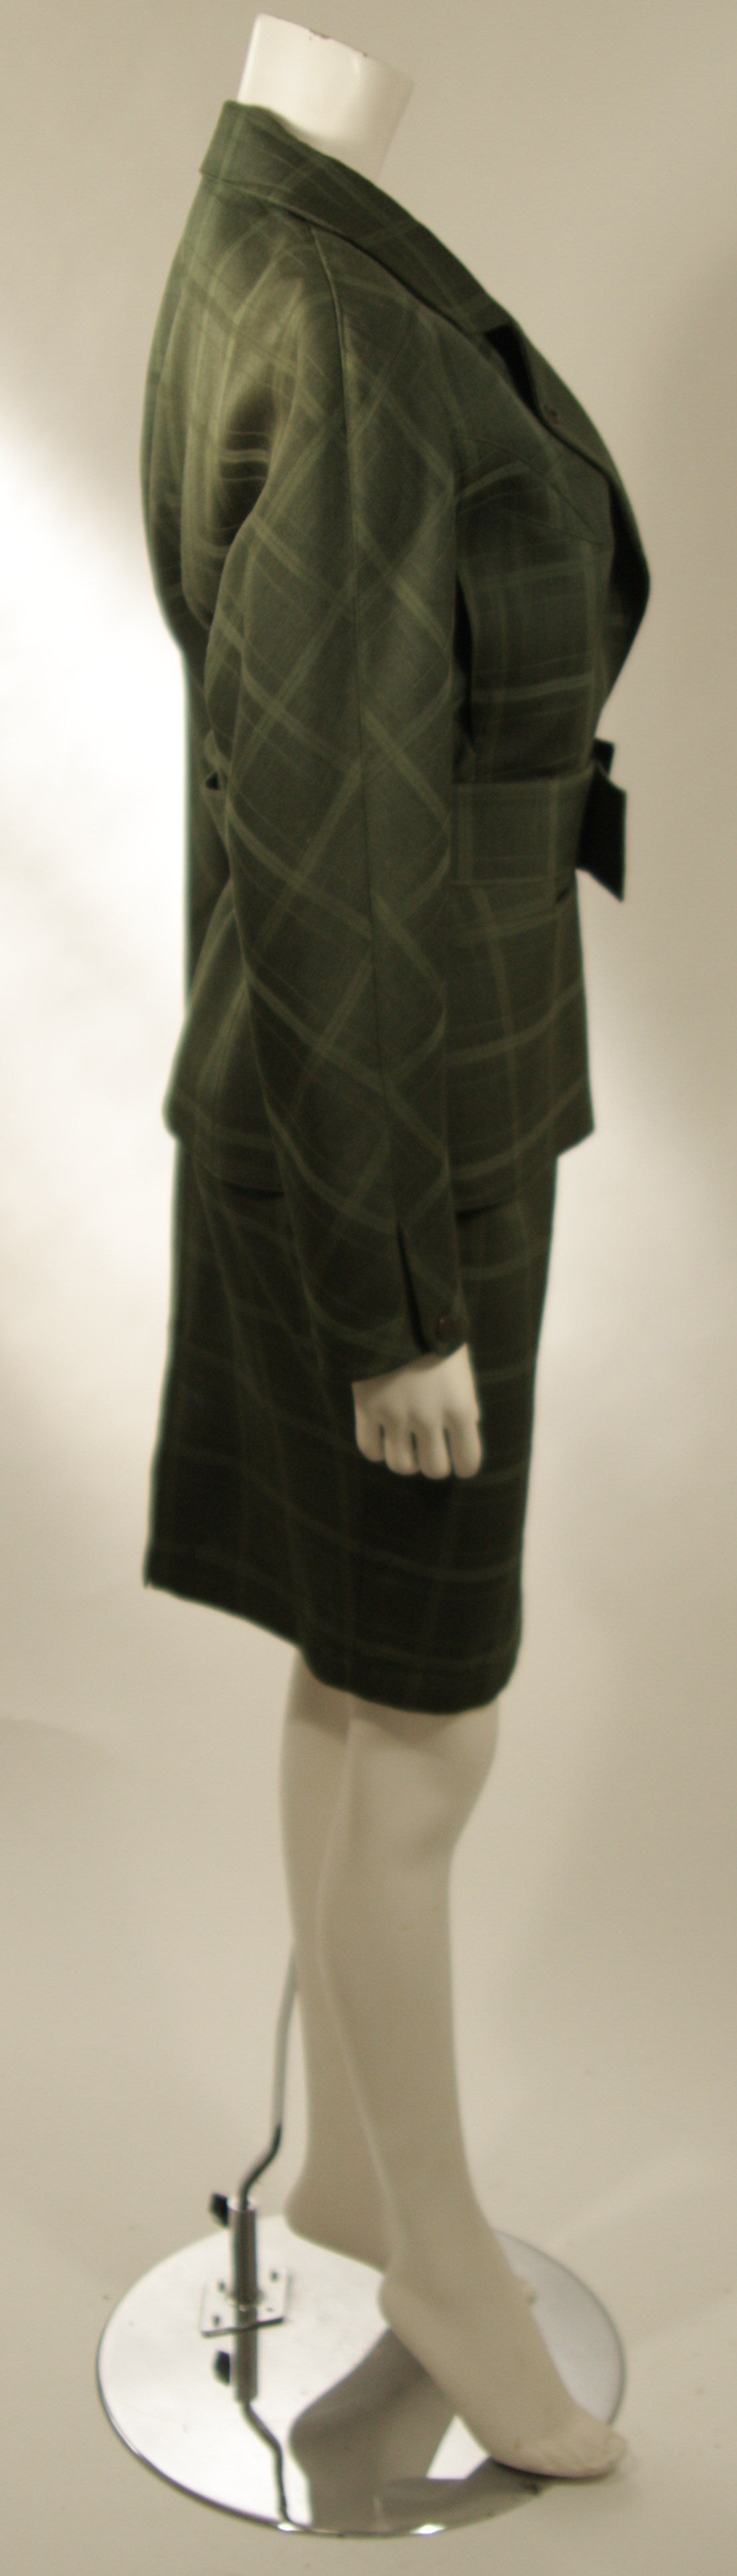 Women's Thierry Mugler Green Plaid Skirt Suit with Belt Size 40